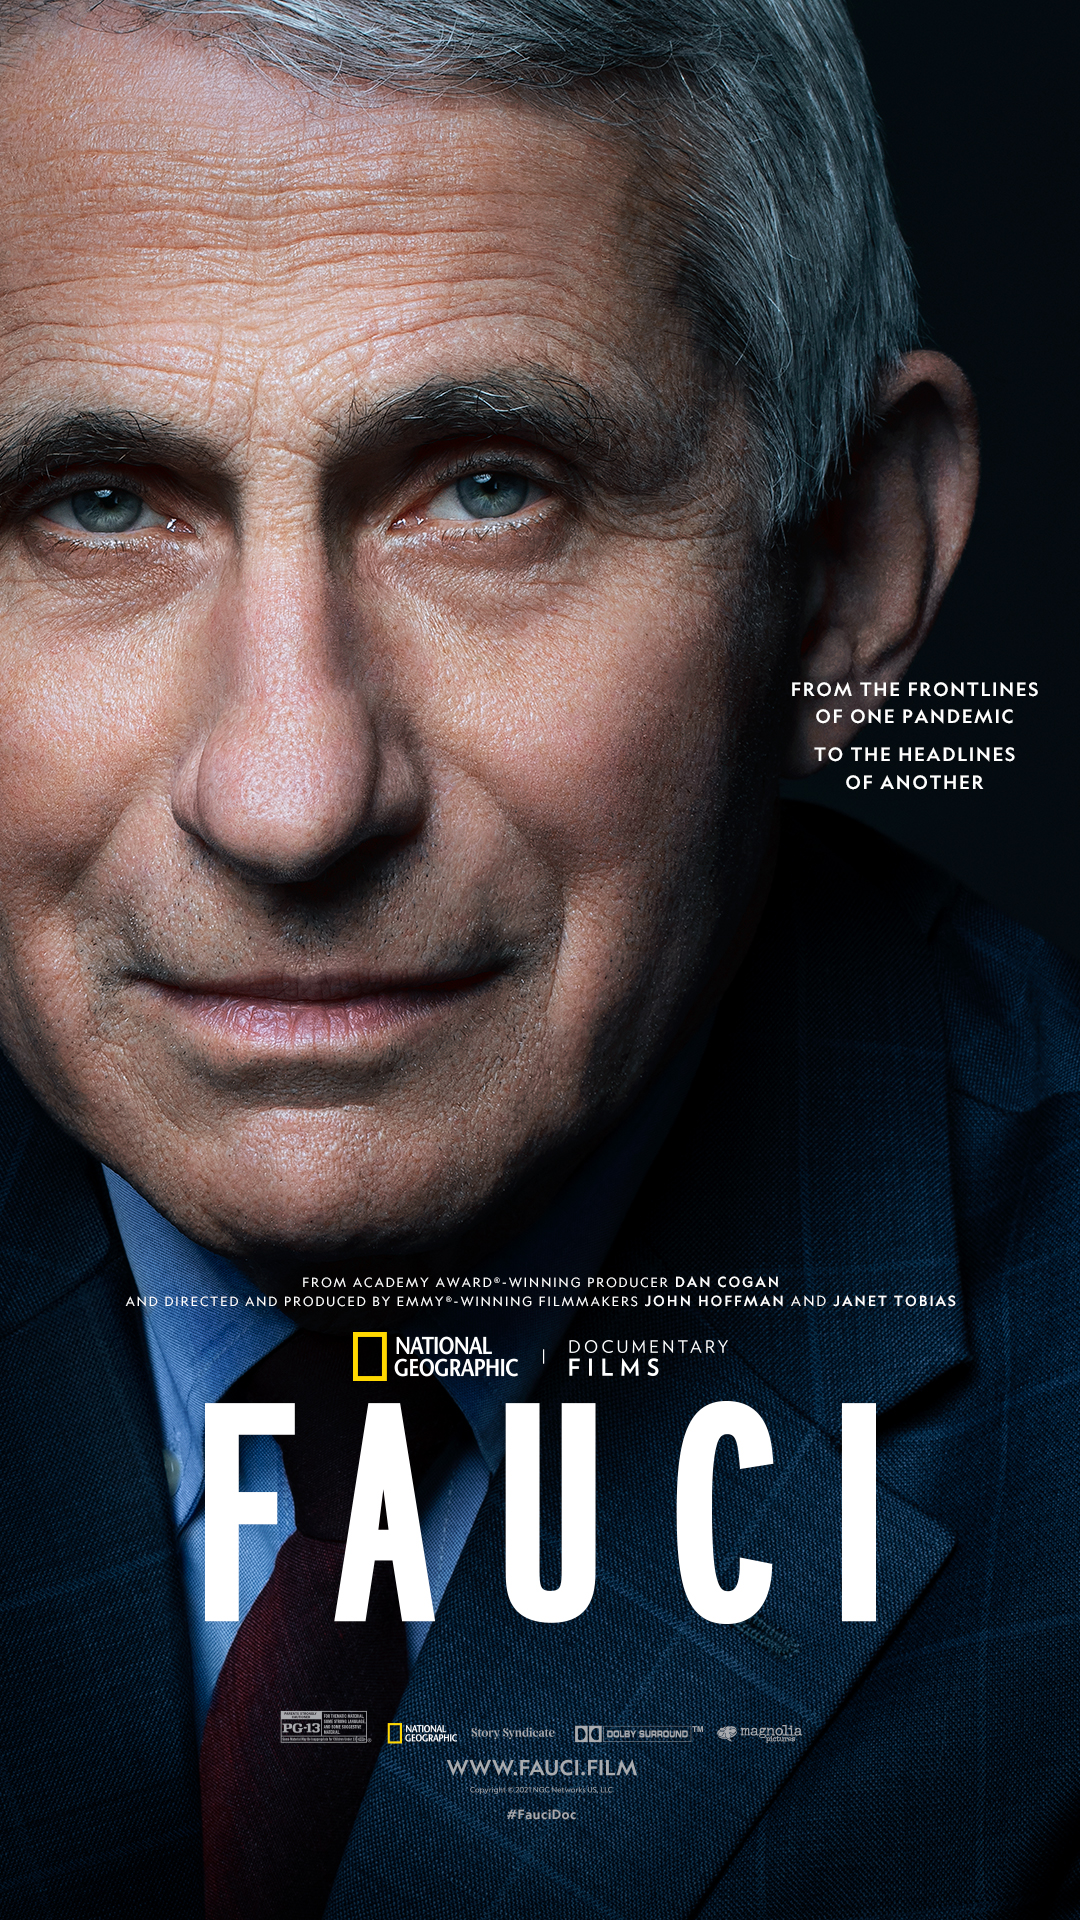 Up close picture of Dr. Anthony Fauci with the word FAUCI in white text overlaid at the bottom.